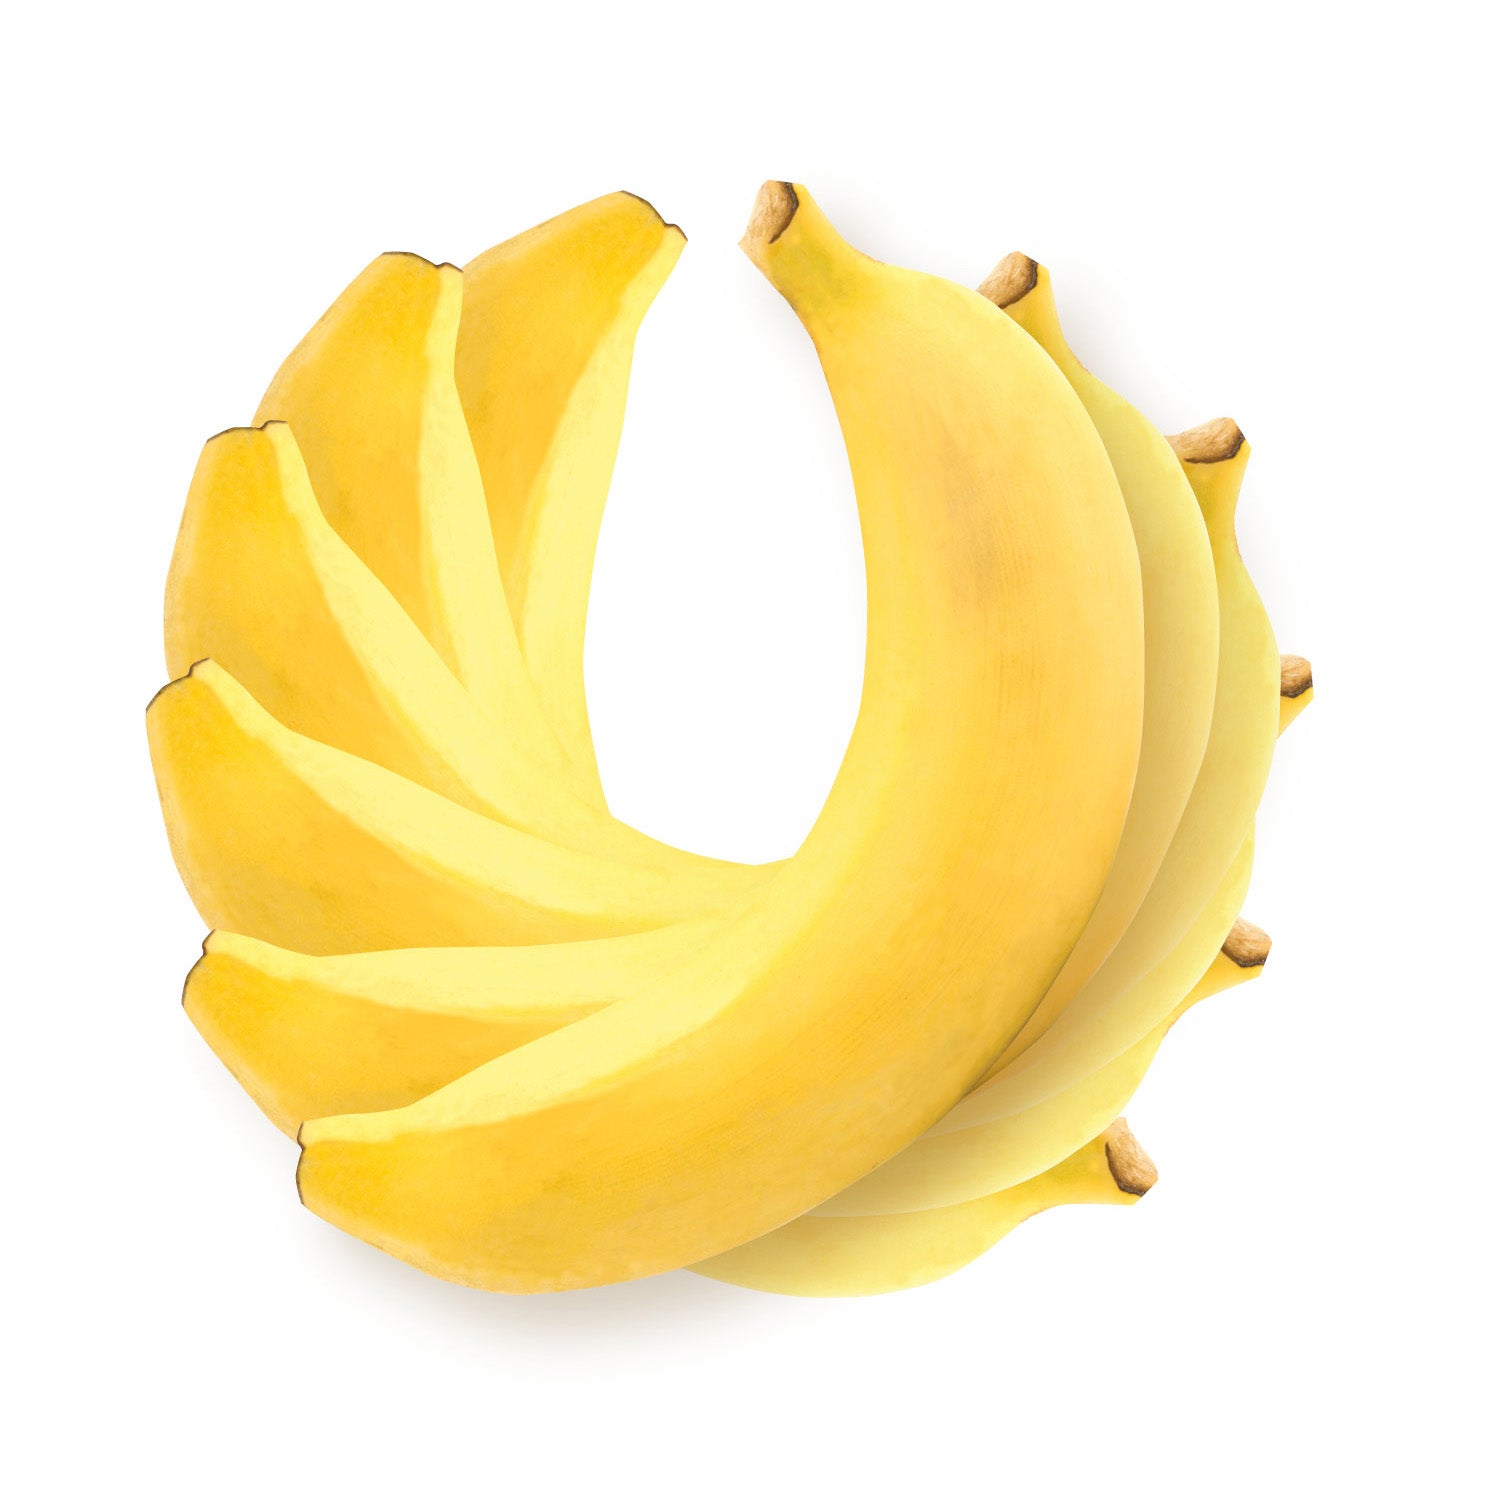 Six organic bananas stacked and rotated to make a spiral pattern on a white background